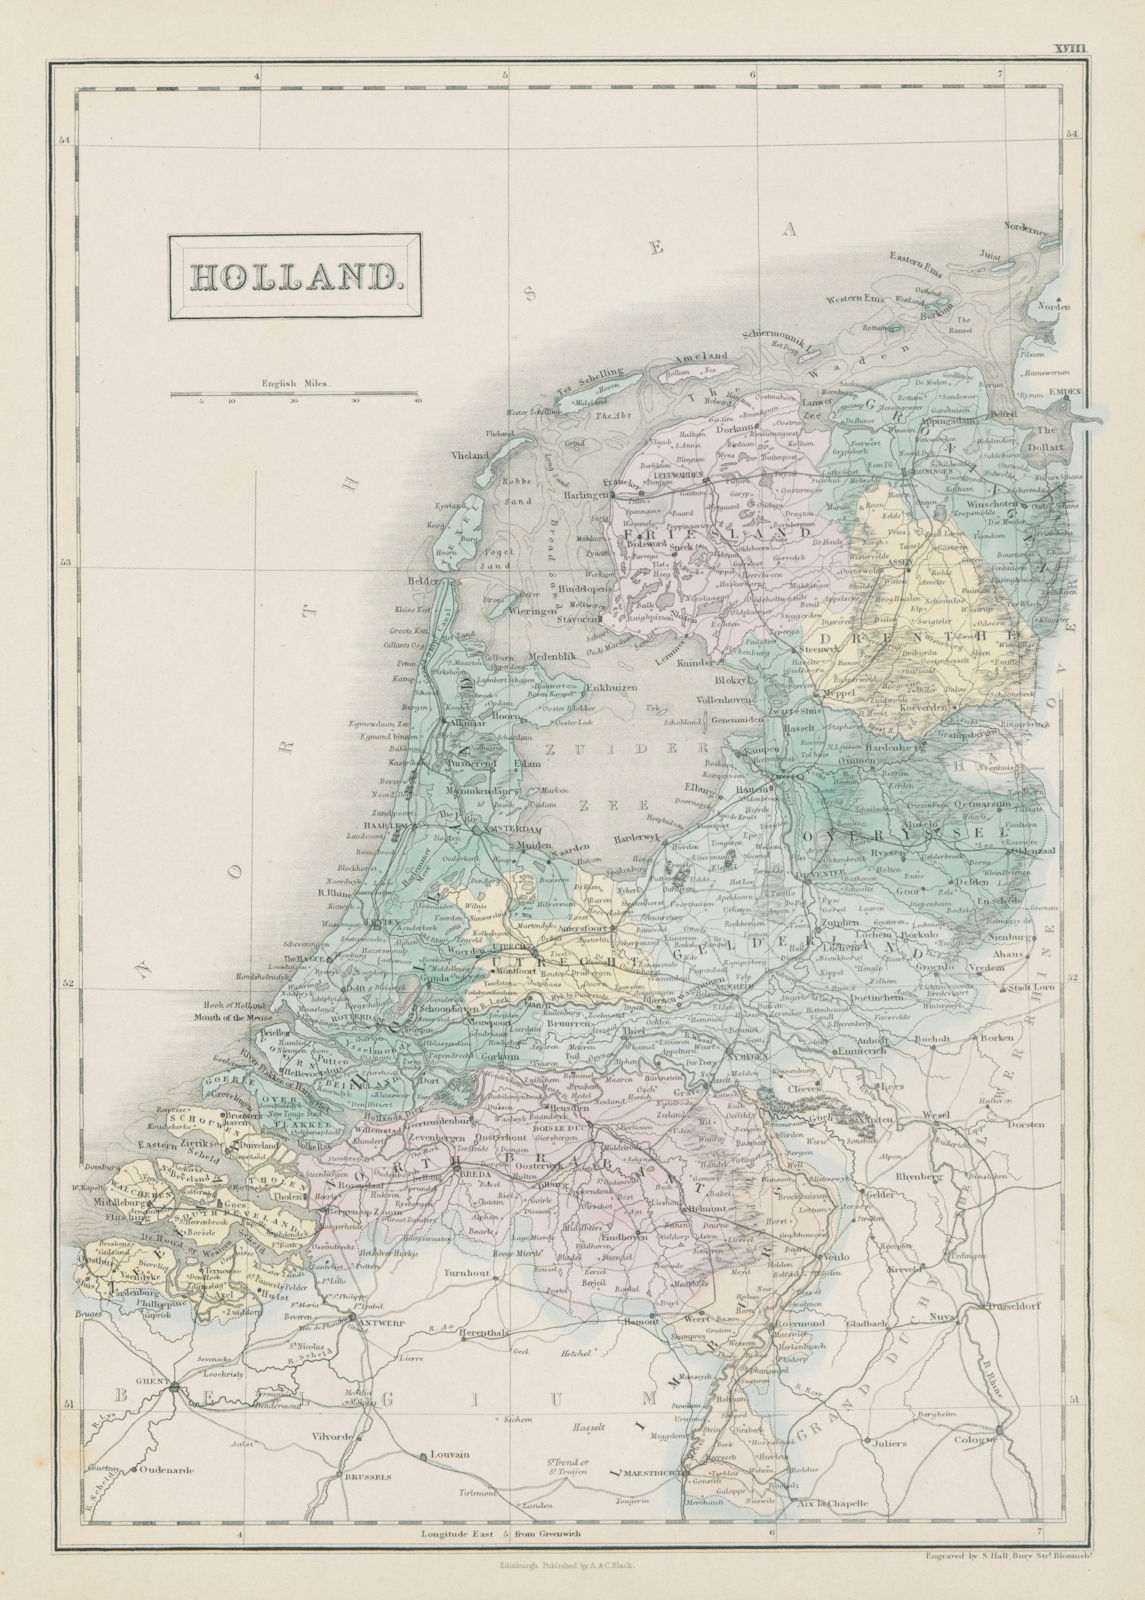 Associate Product "Holland". Netherlands. Railways. SIDNEY HALL 1856 old antique map plan chart